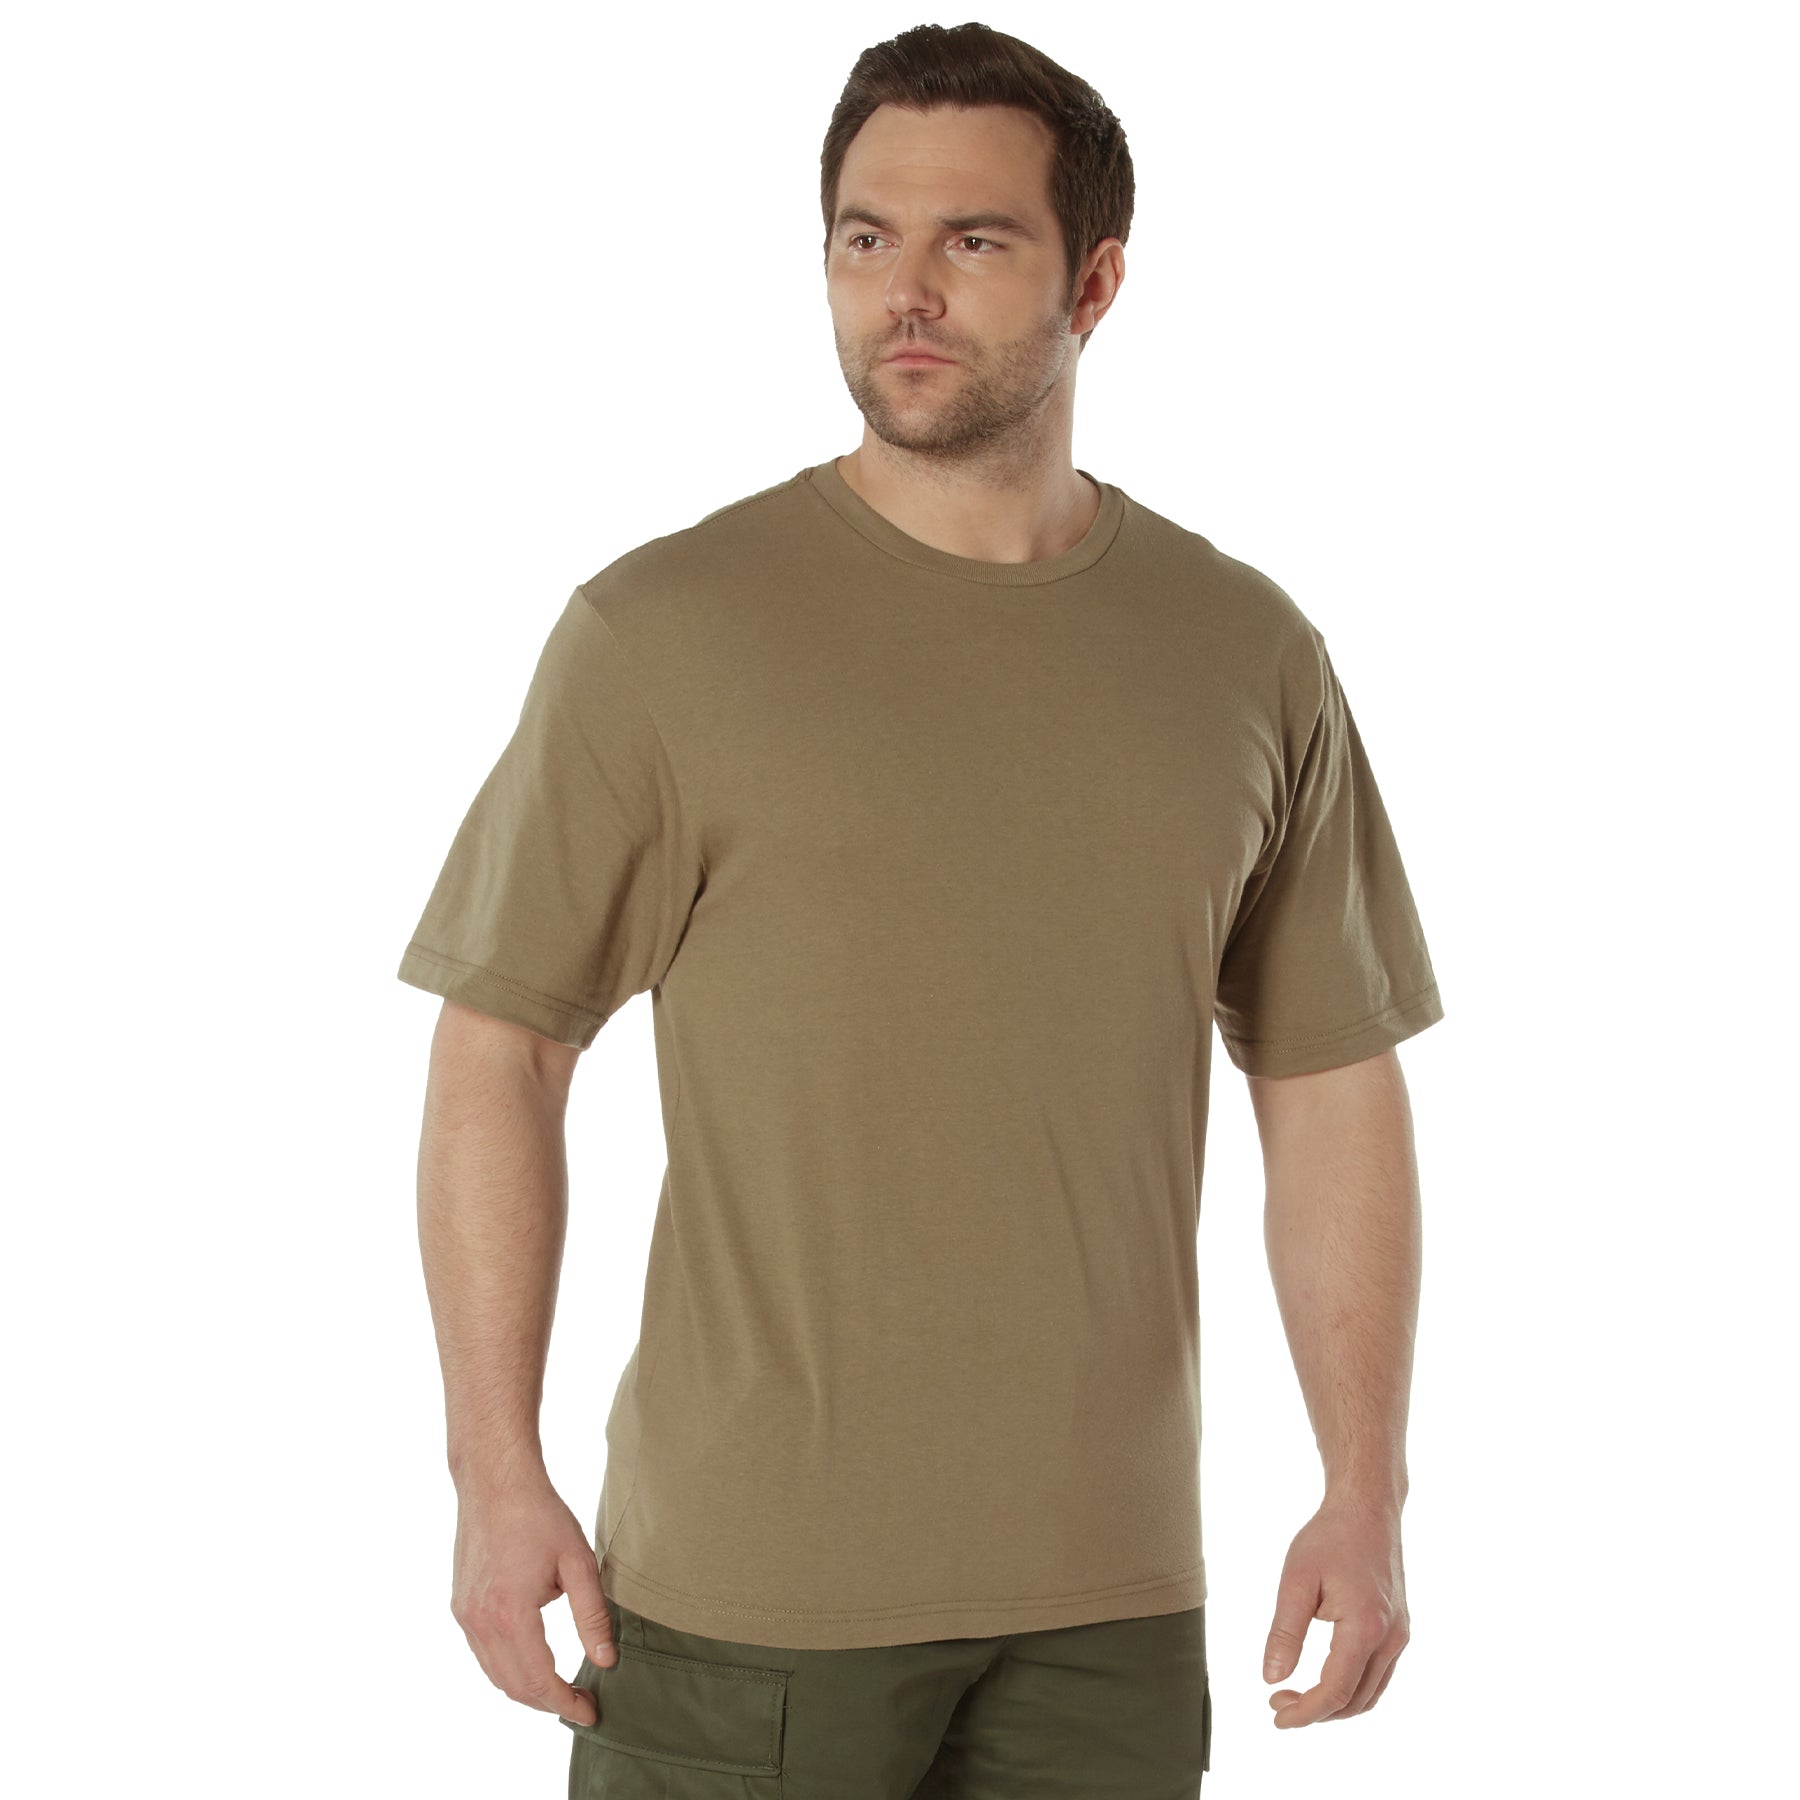 [AR 670-1] Poly/Cotton Comfort Fit T-Shirts Work Brown